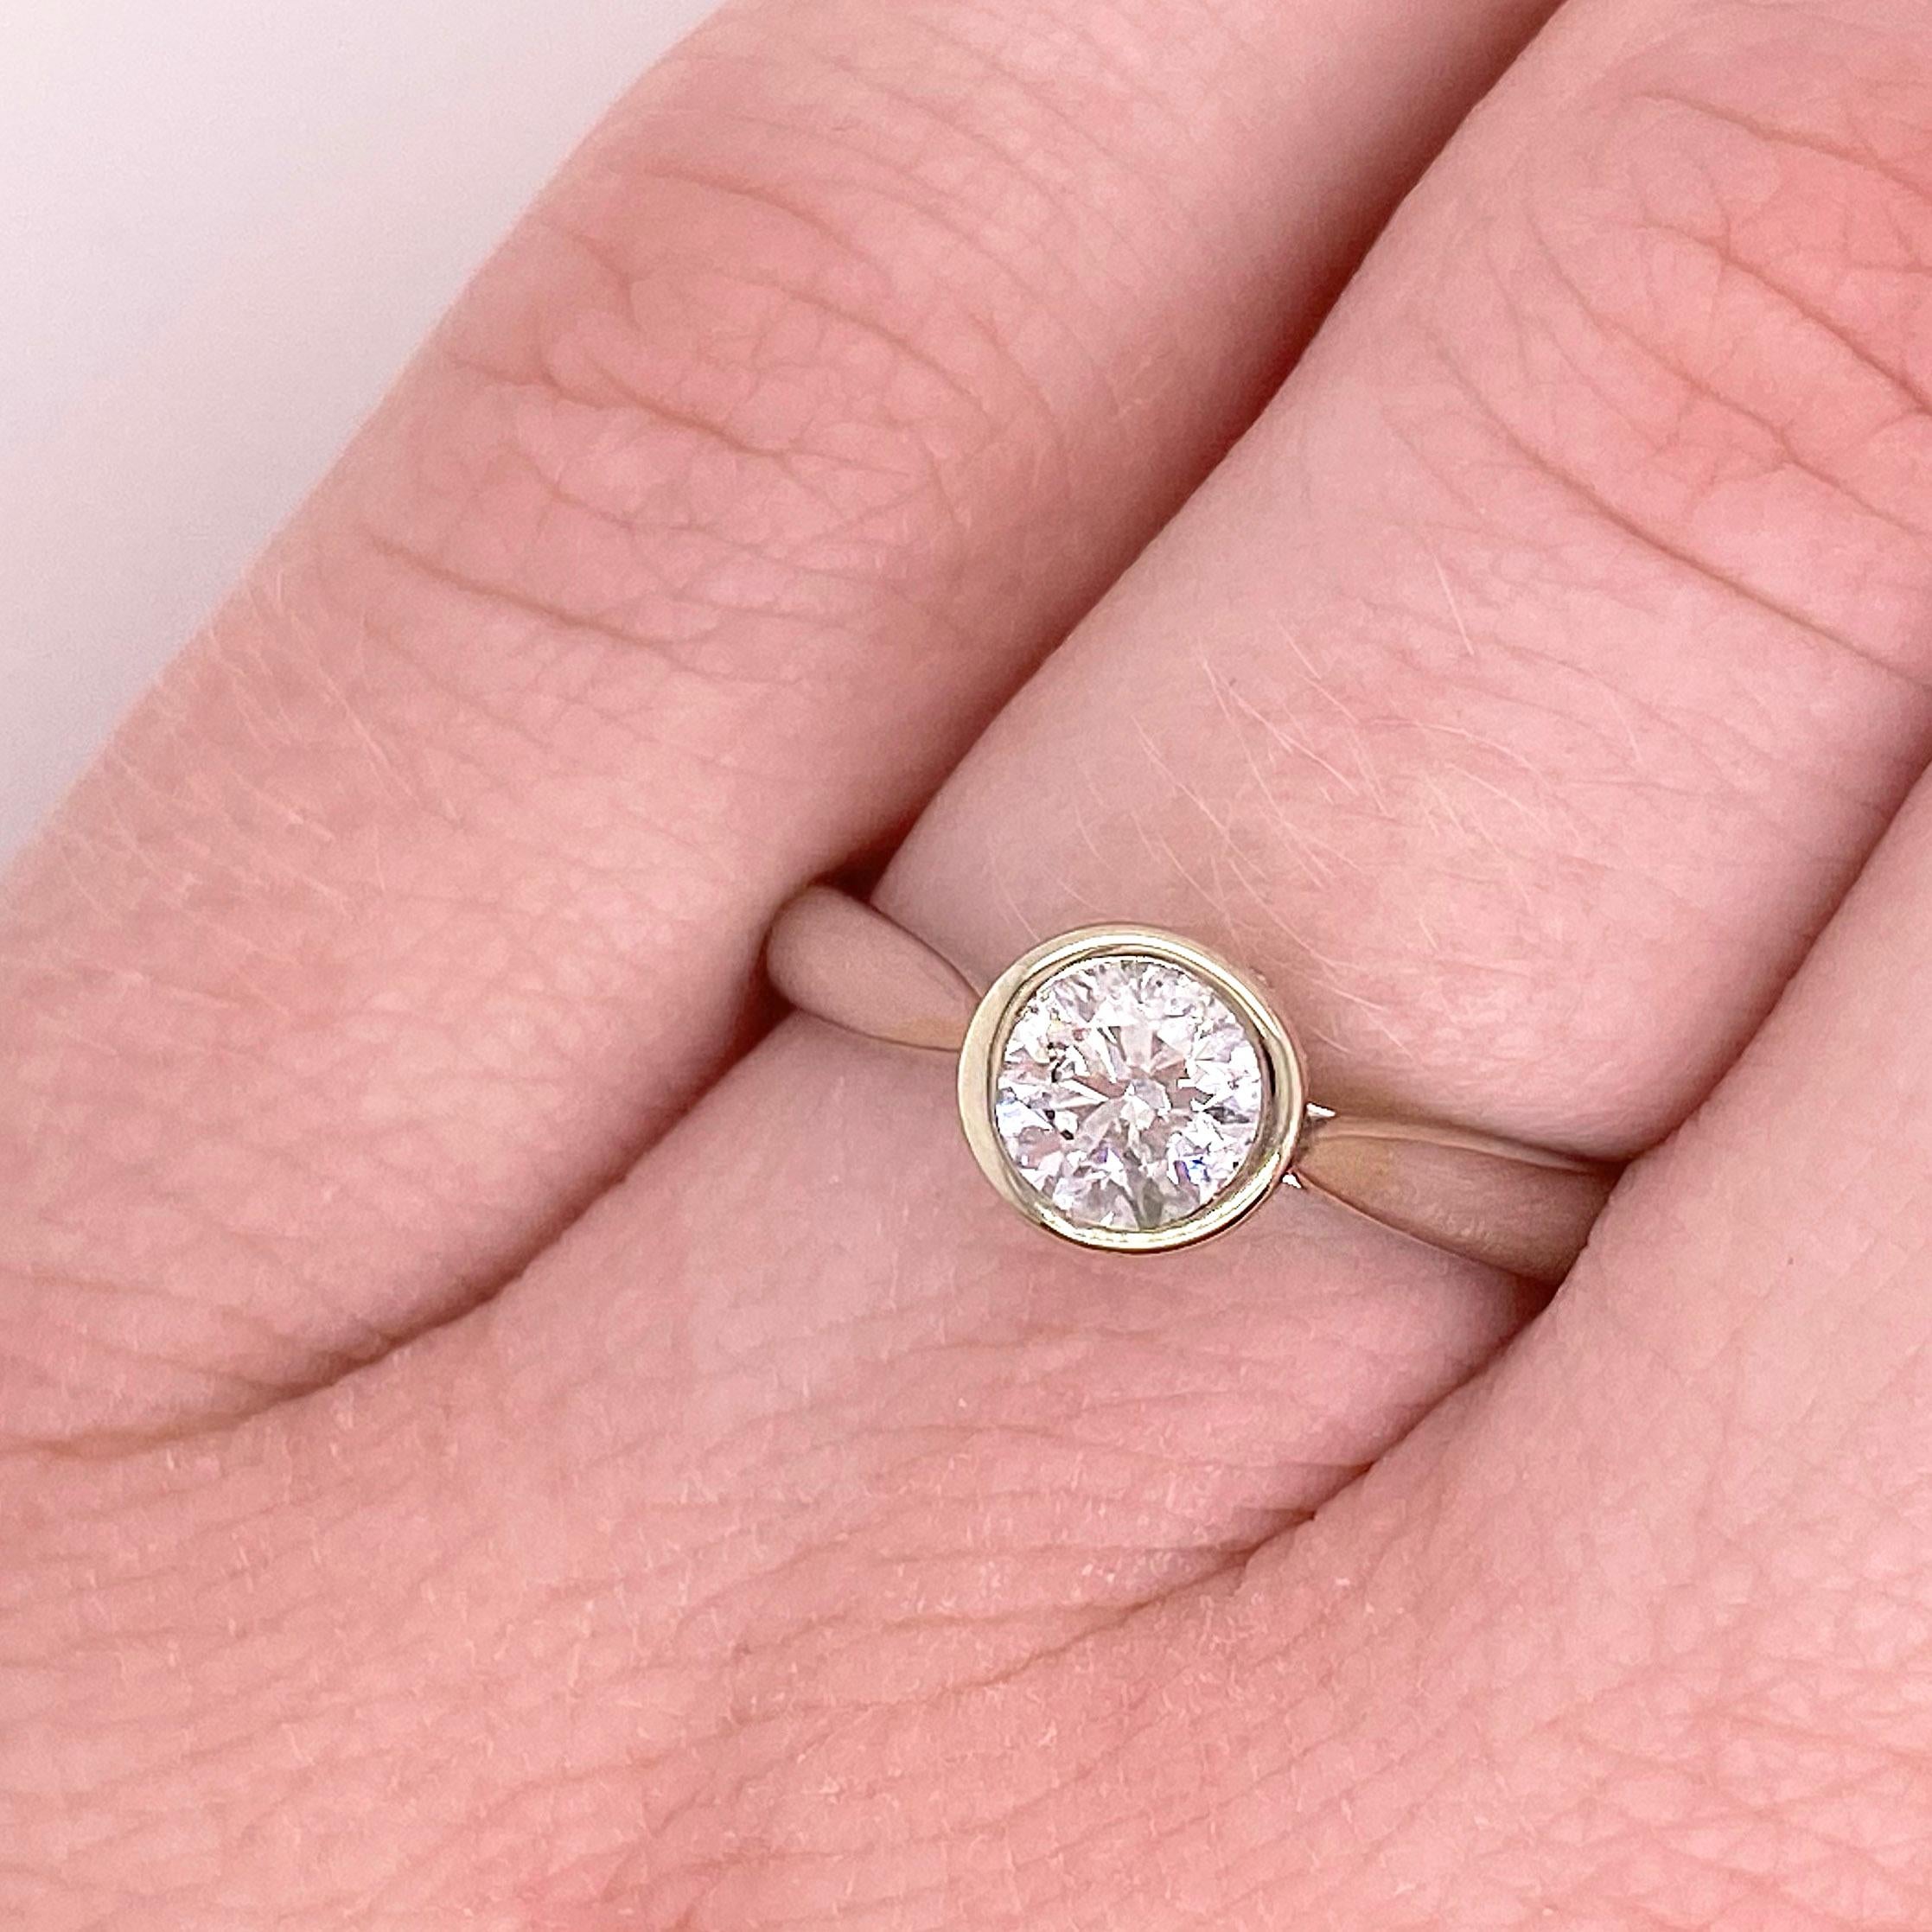 Gorgeous round brilliant cut diamond solitaire engagement ring! This gorgeous center diamond is set in a polished bezel with a hidden halo. The 14 karat white gold engagement ring is the perfect compliment to this stunning round diamond. Very